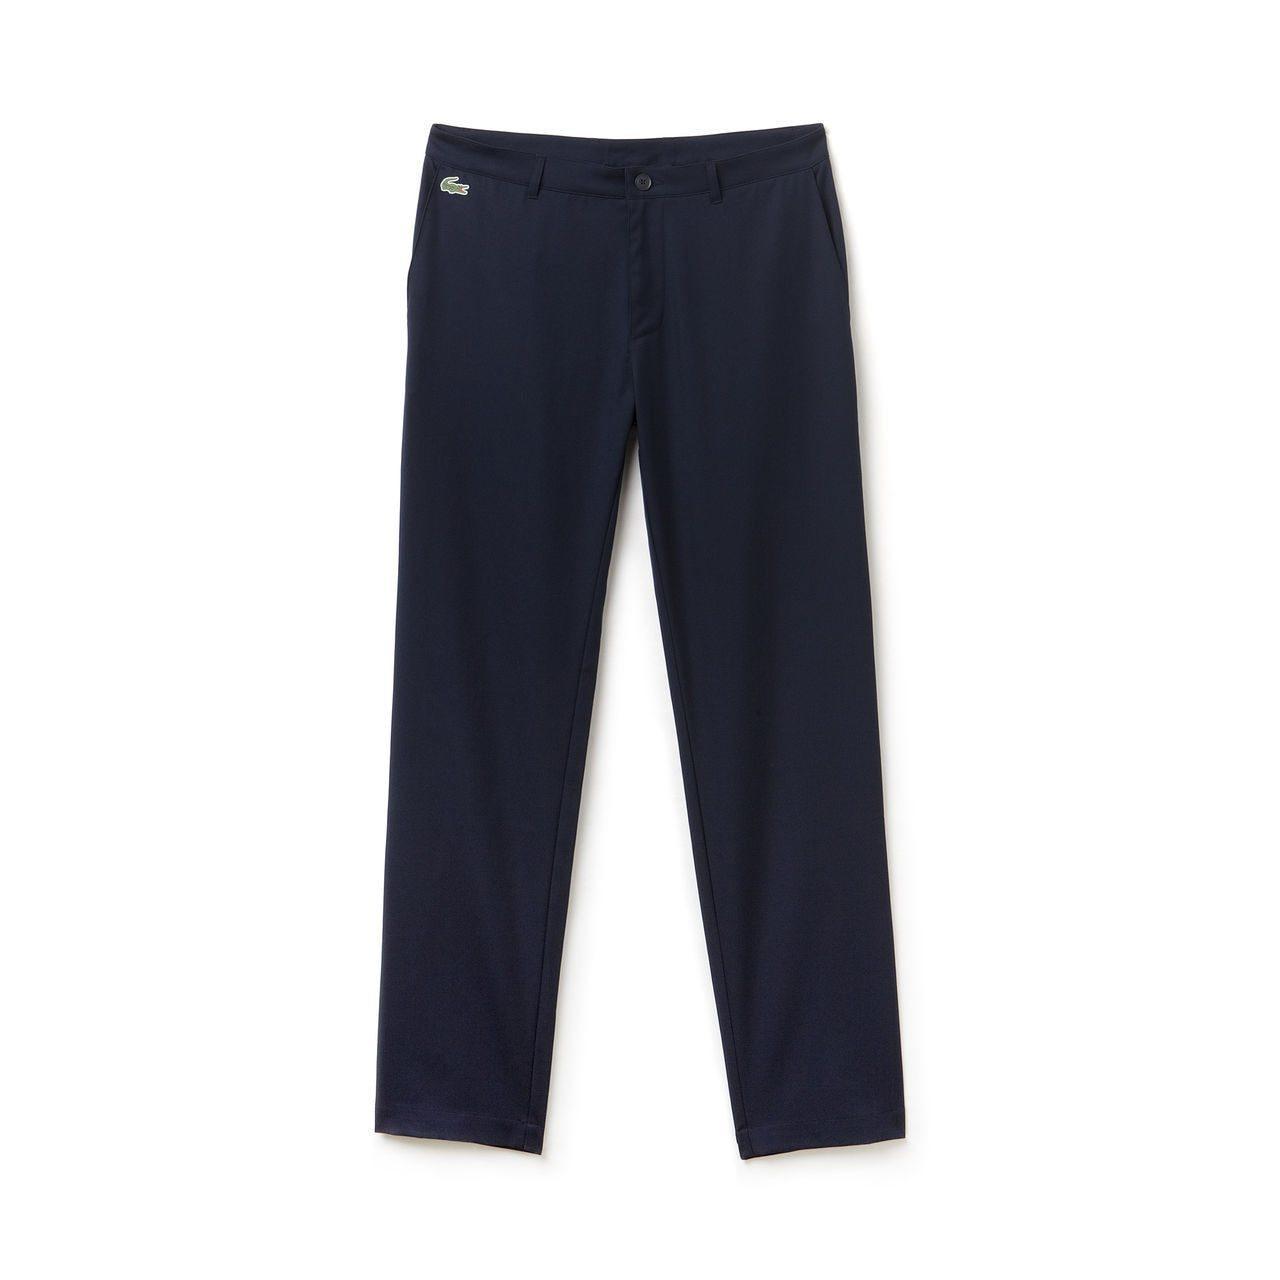 Chino Trousers - Hh1624Cw